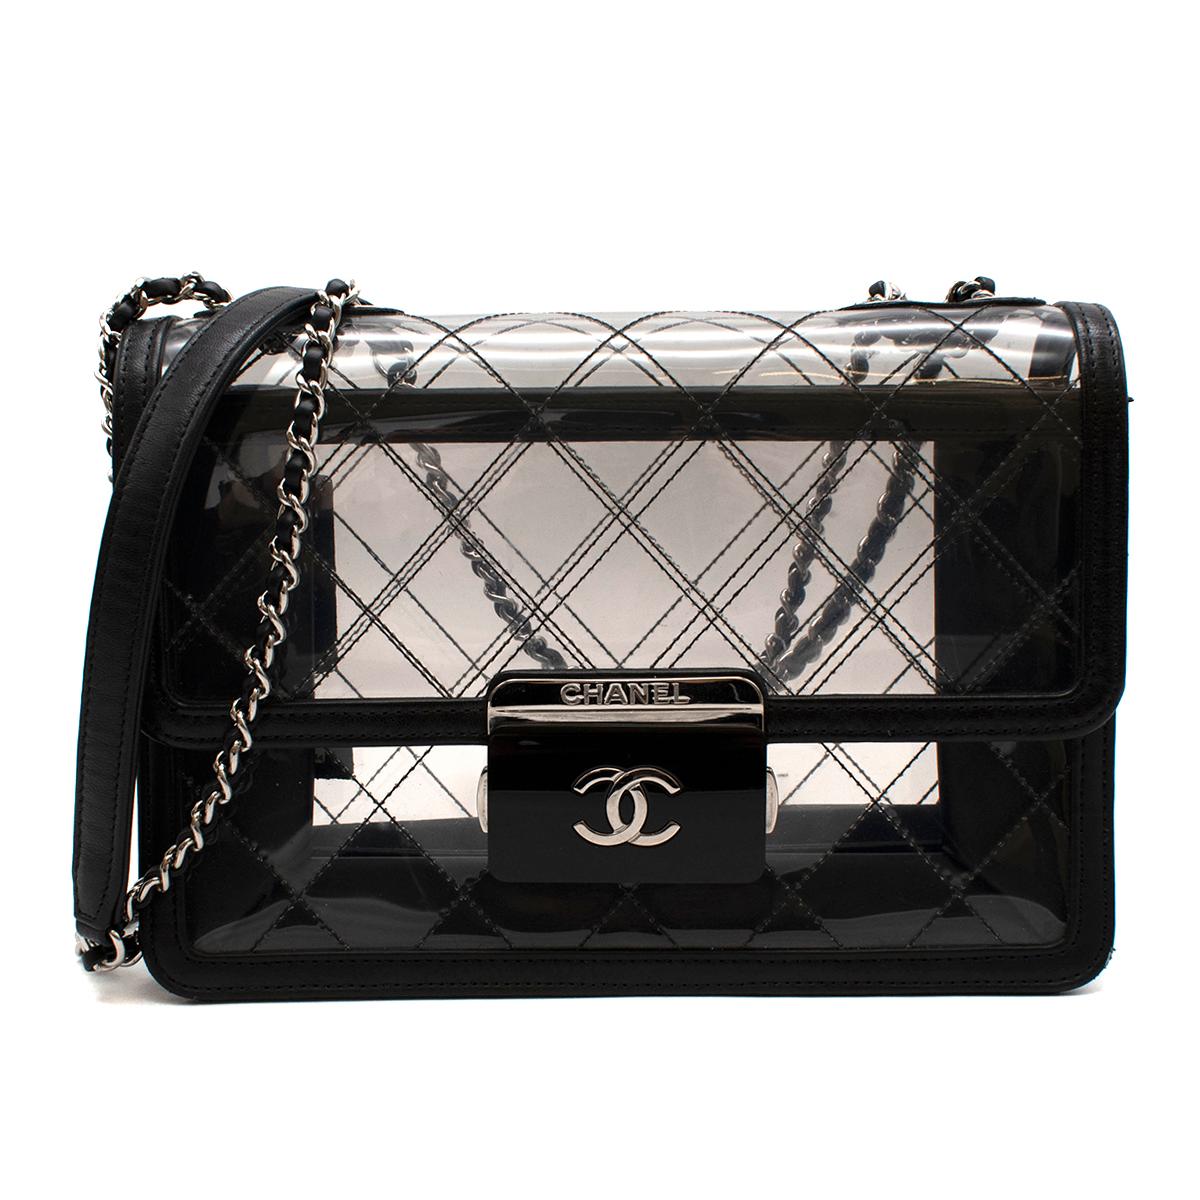 Chanel PVC Lambskin Quilted Lock Flap Bag

- Slim Silver-tone hardware chain
- Diamond stitched outer 
- Black Resin Square closure with silver tone CC
- Two internal compartments 
- Original dust-bag and box included 

Made in Italy 

length: